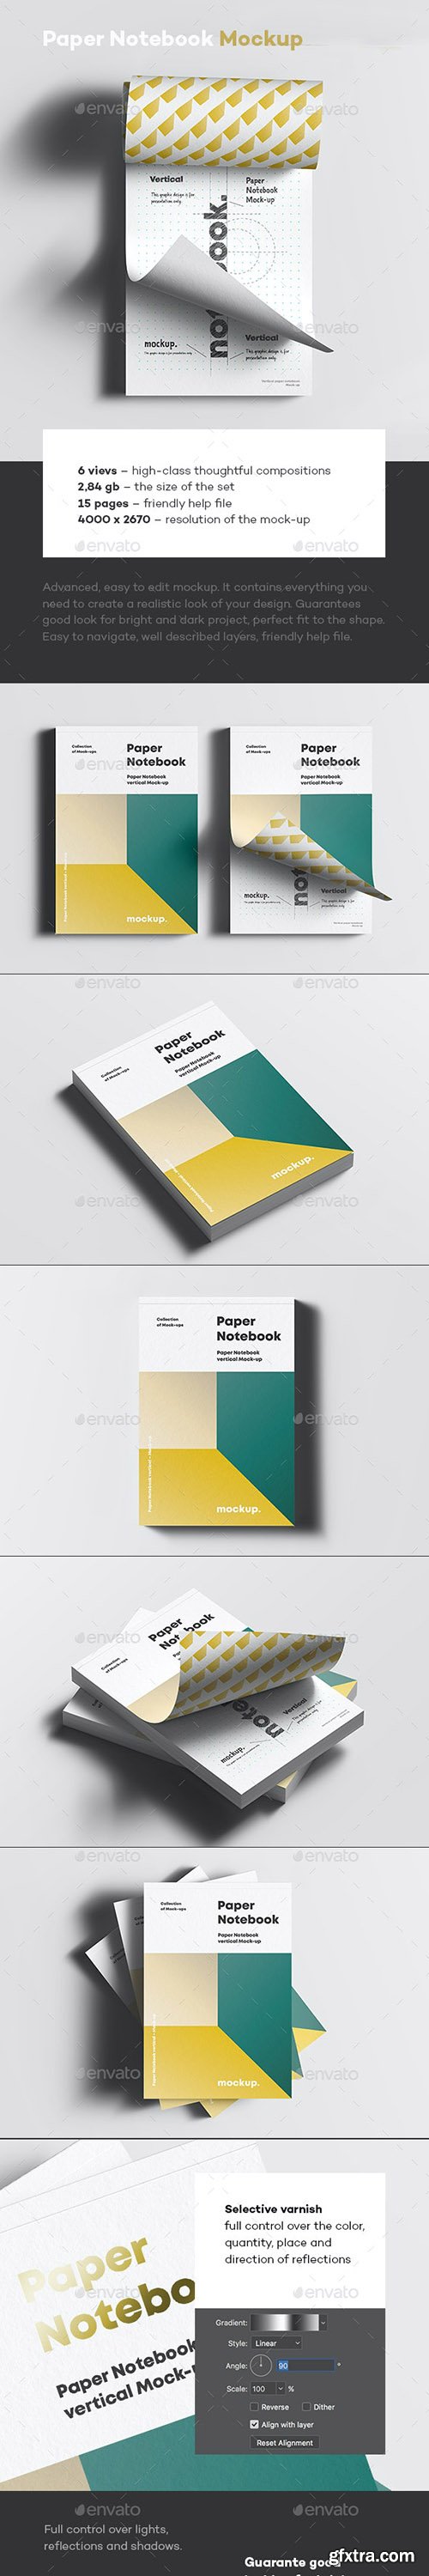 GraphicRiver - Paper Notebook Mock-up 35177314